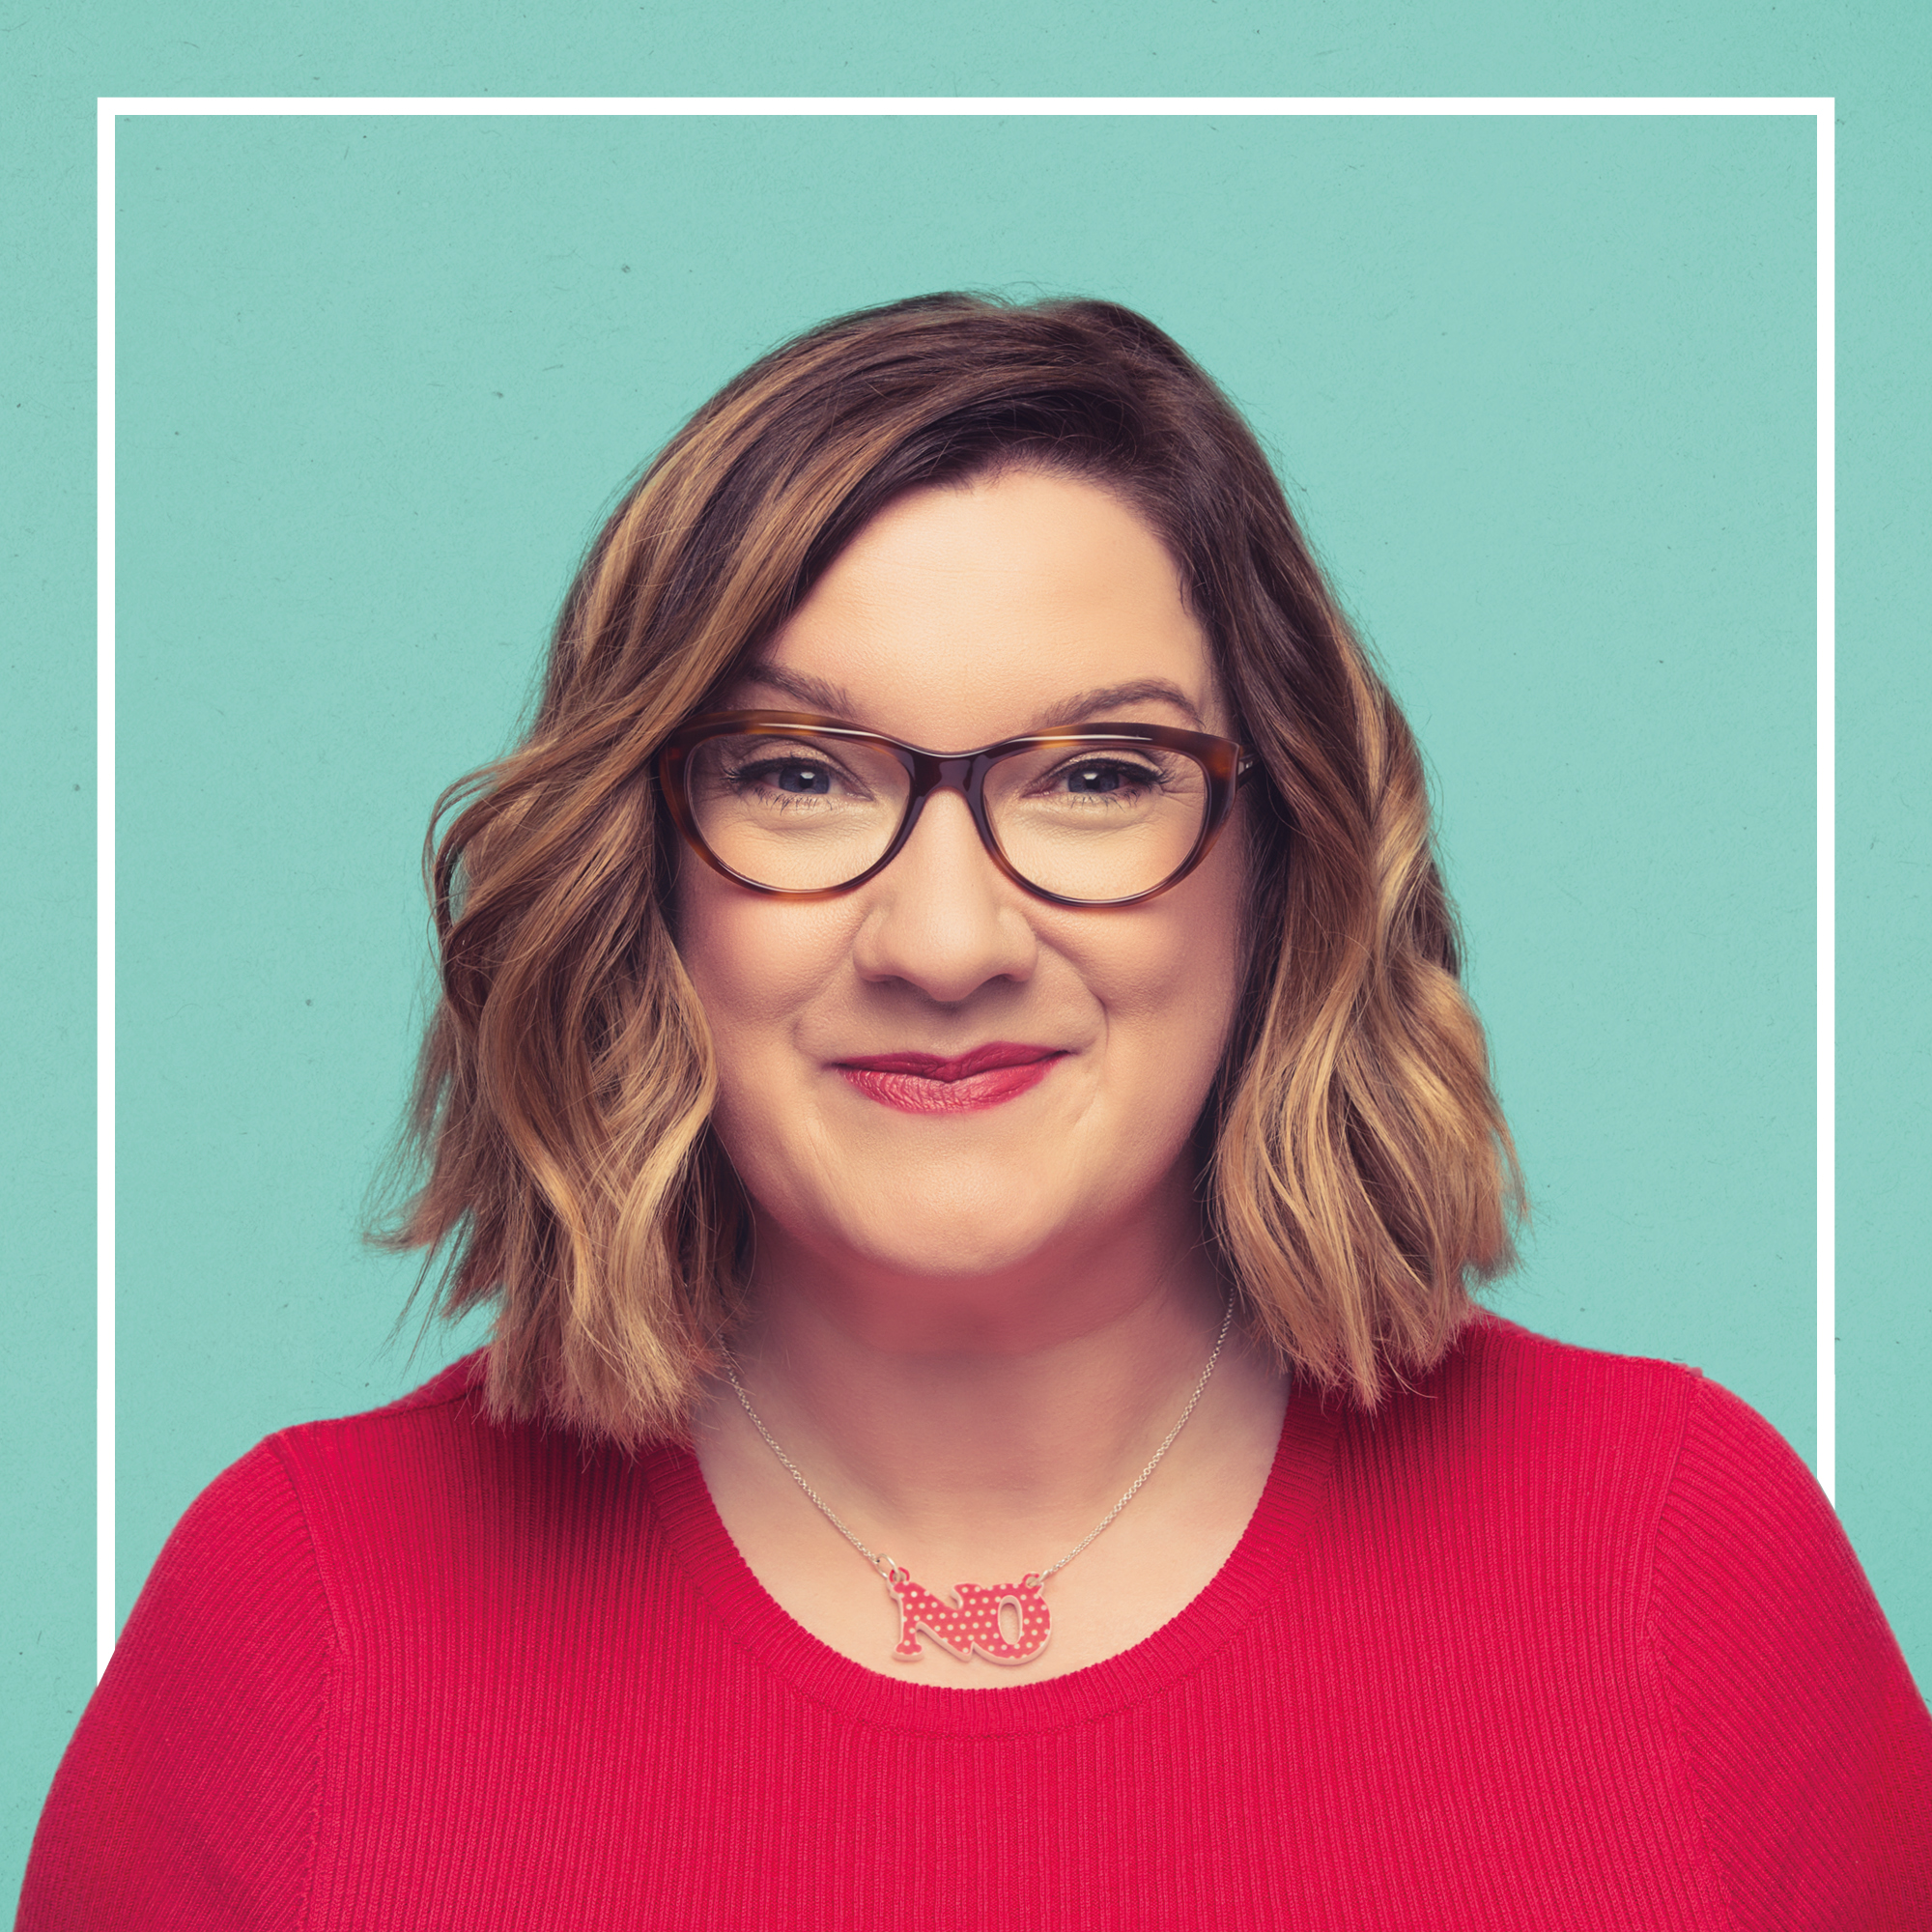 JUST ANNOUNCED: Comedian Sarah Millican is coming to Warrington as part of Control Enthusiast tour